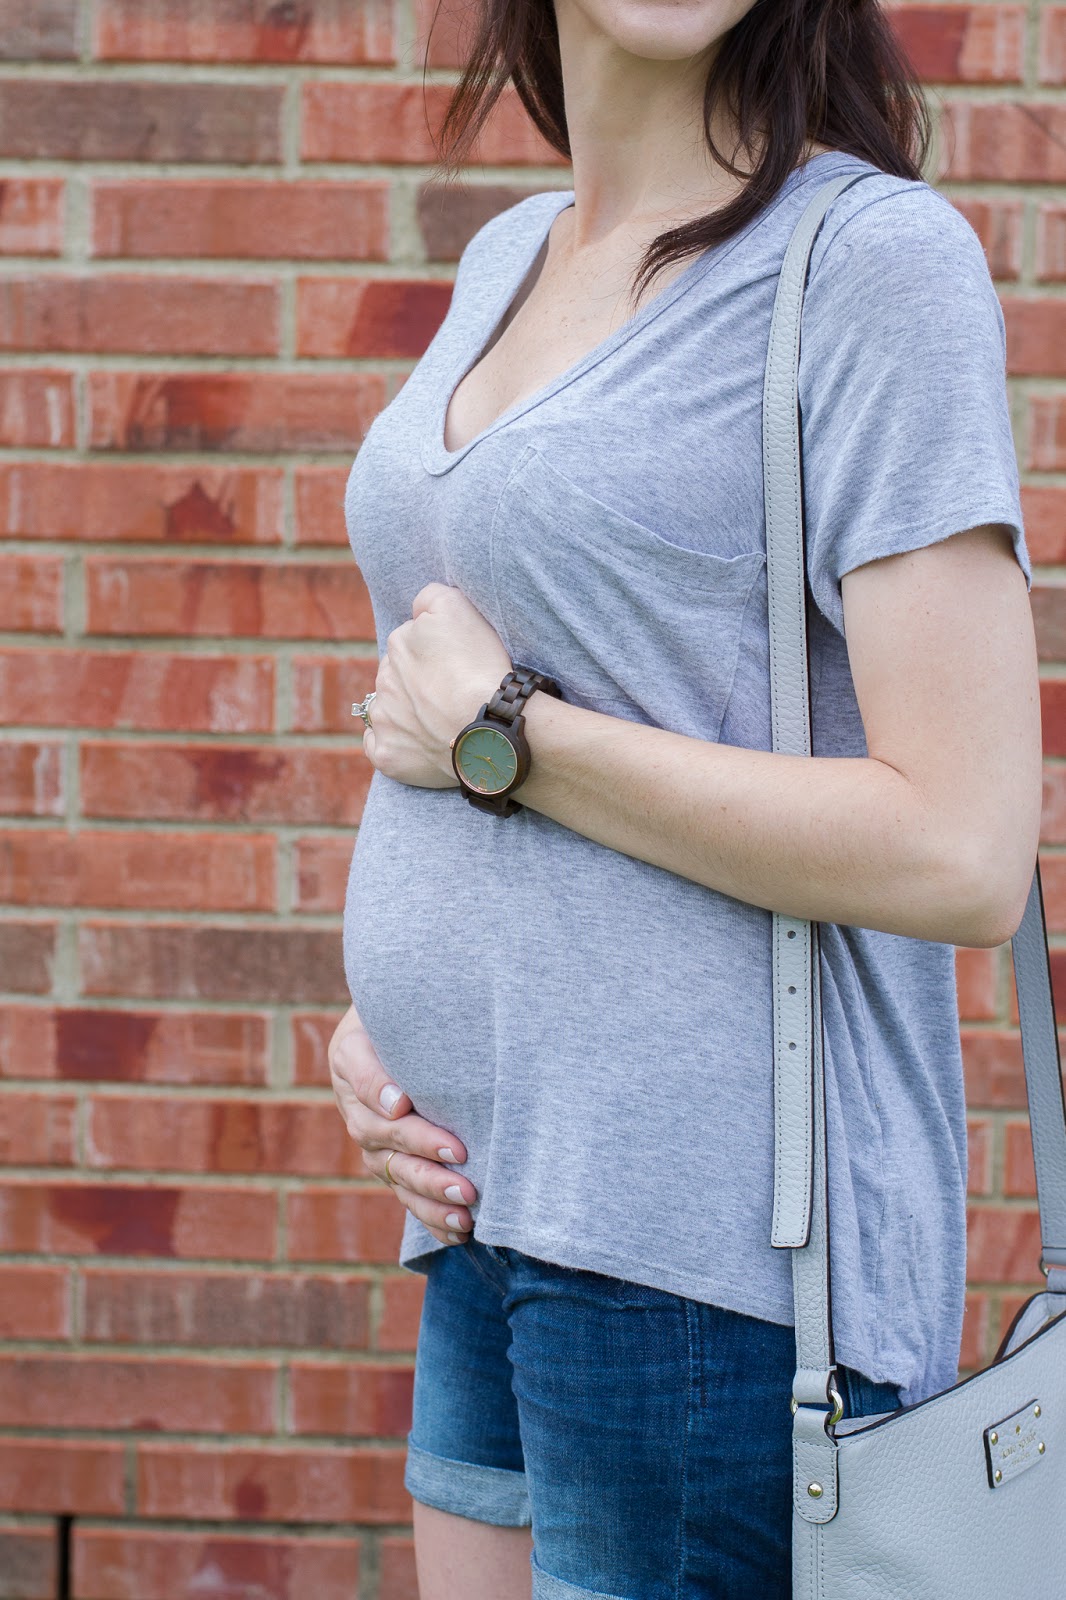 Summer baby bump in a basic tee and wood watch 